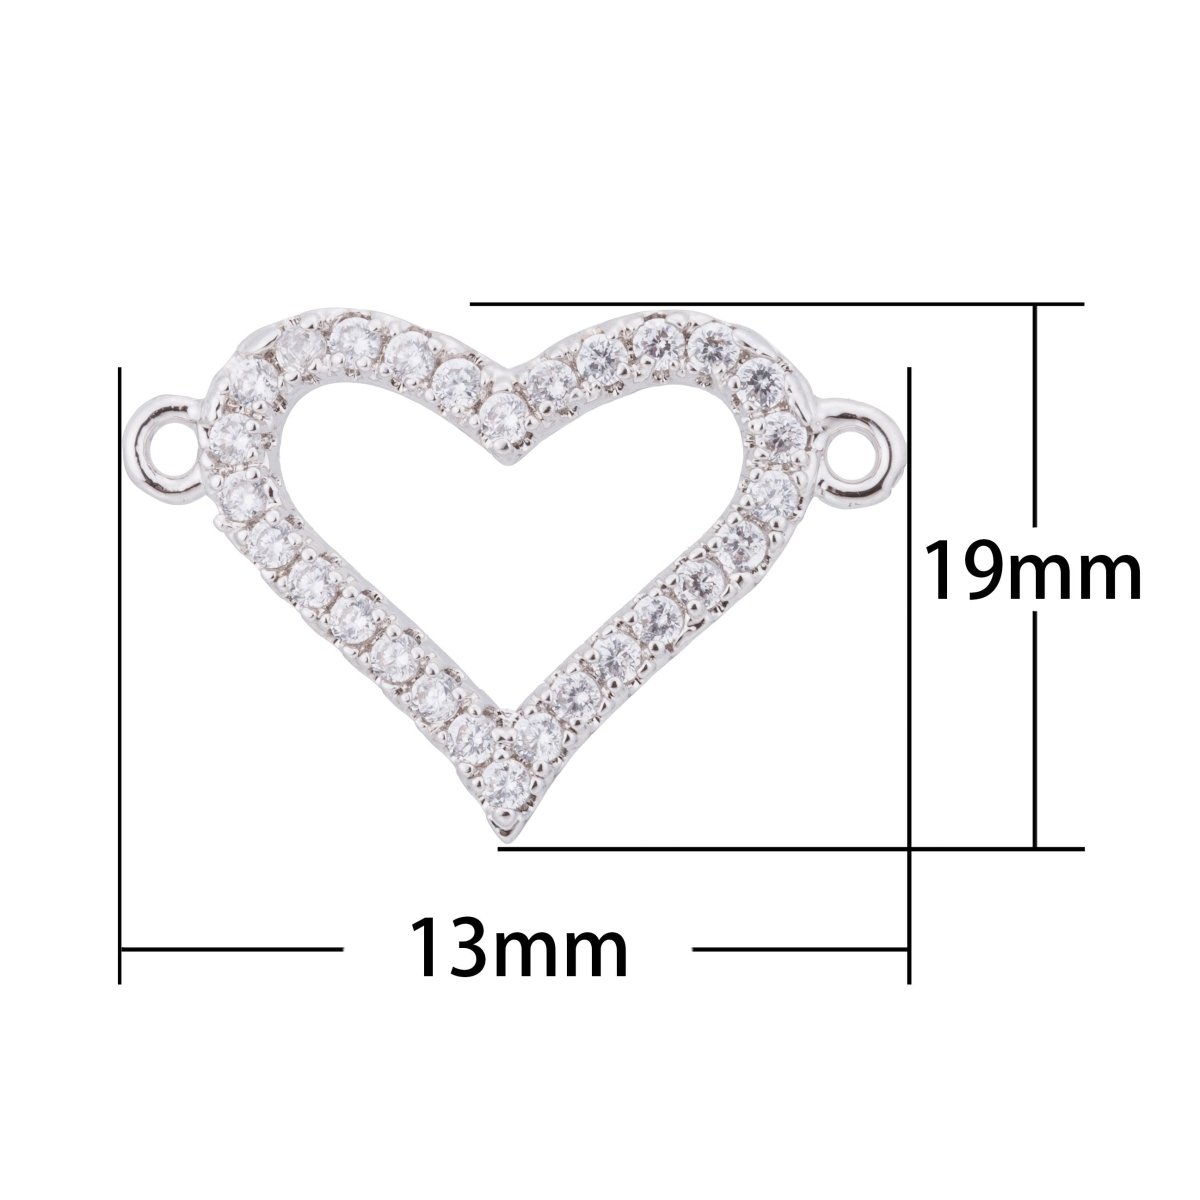 Silver I Love You Charm, Heart Charm, Love Charm Bracelet, DIY Cubic Zirconia Pave Bracelet Charm Bead Connector For Jewelry Making F-577 - DLUXCA